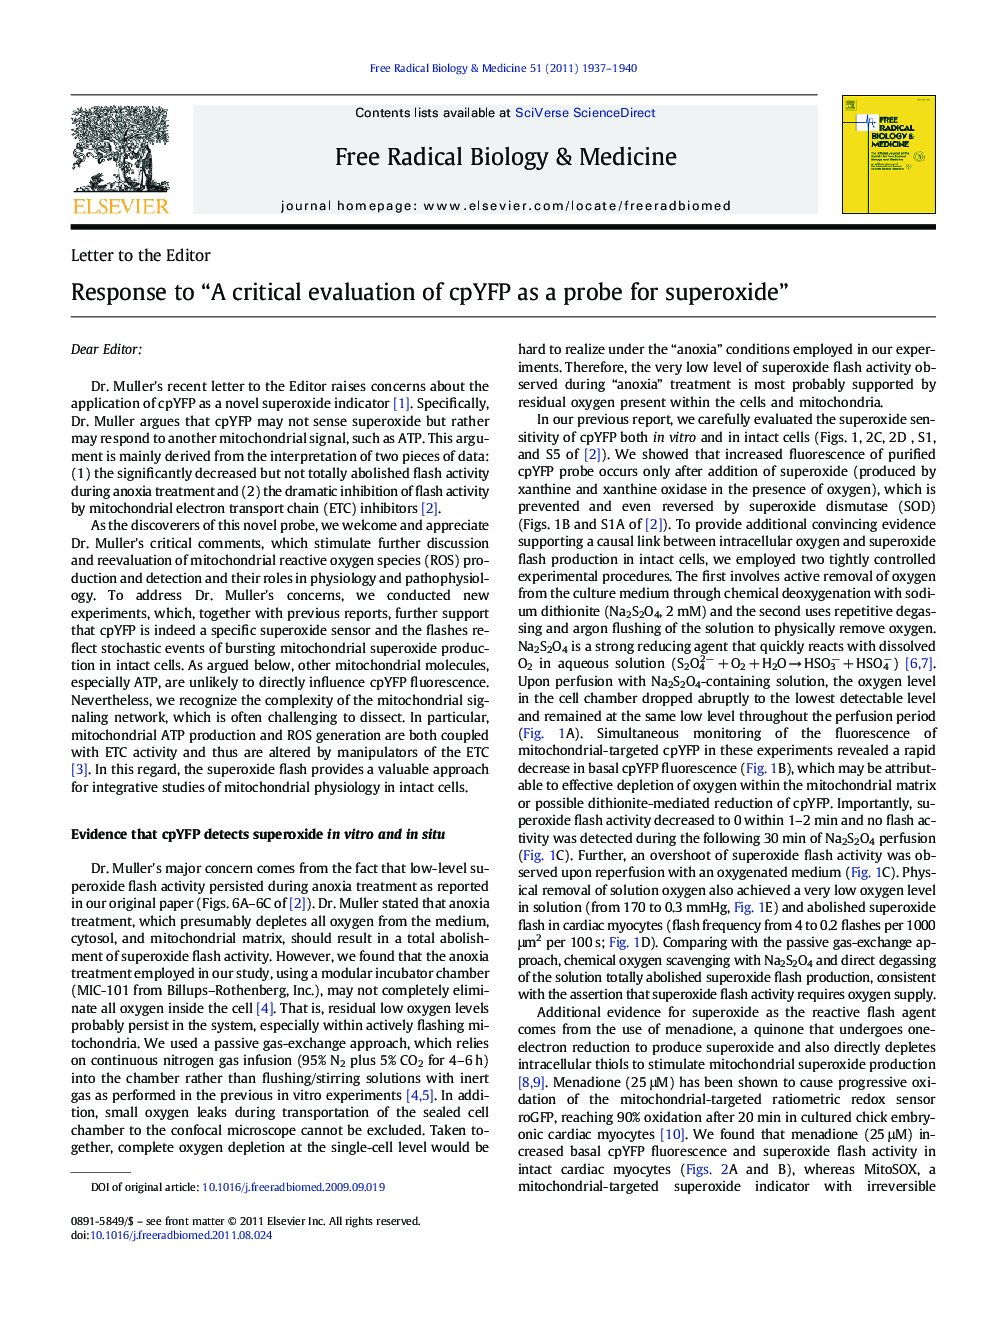 Response to “A critical evaluation of cpYFP as a probe for superoxide”